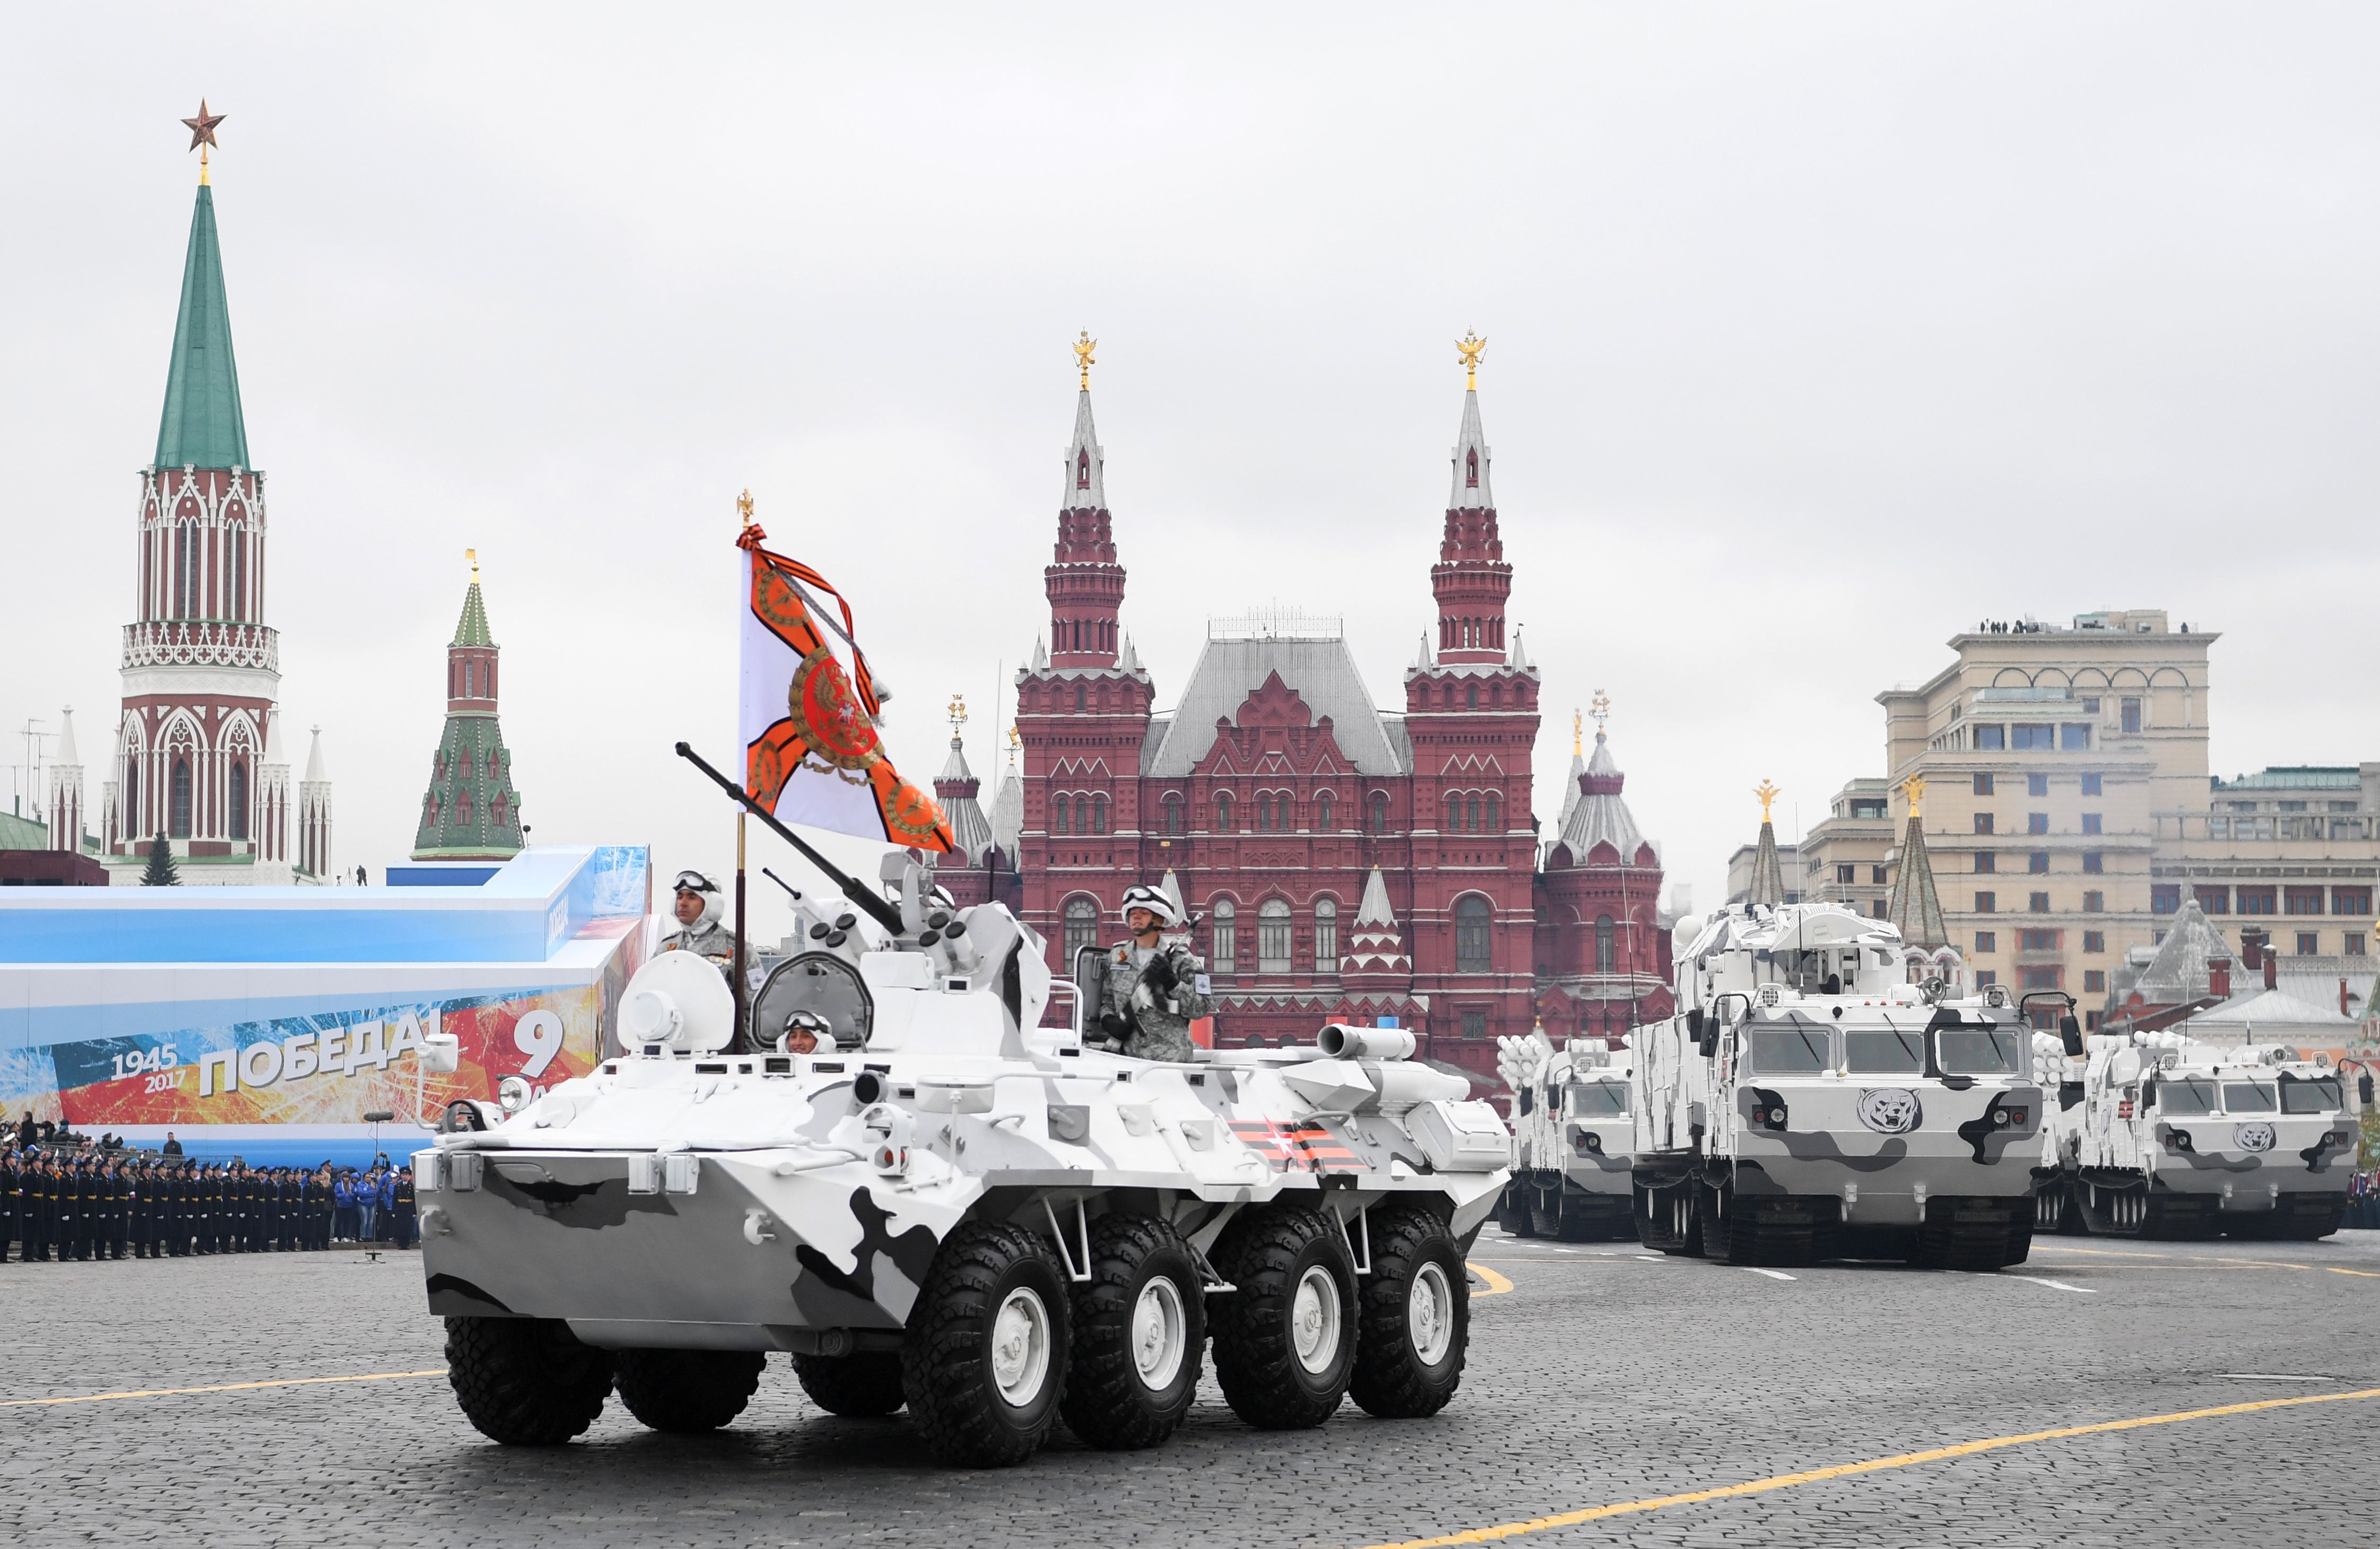 Russian TOR-M2 tactical surface-to-air missile systems and Pantsir-SA air defense systems are decked out in their Arctic colors as they ride through Red Square during a military parade in Moscow on May 9, 2017. (Natalia Kolesnikova/AFP via Getty Images)